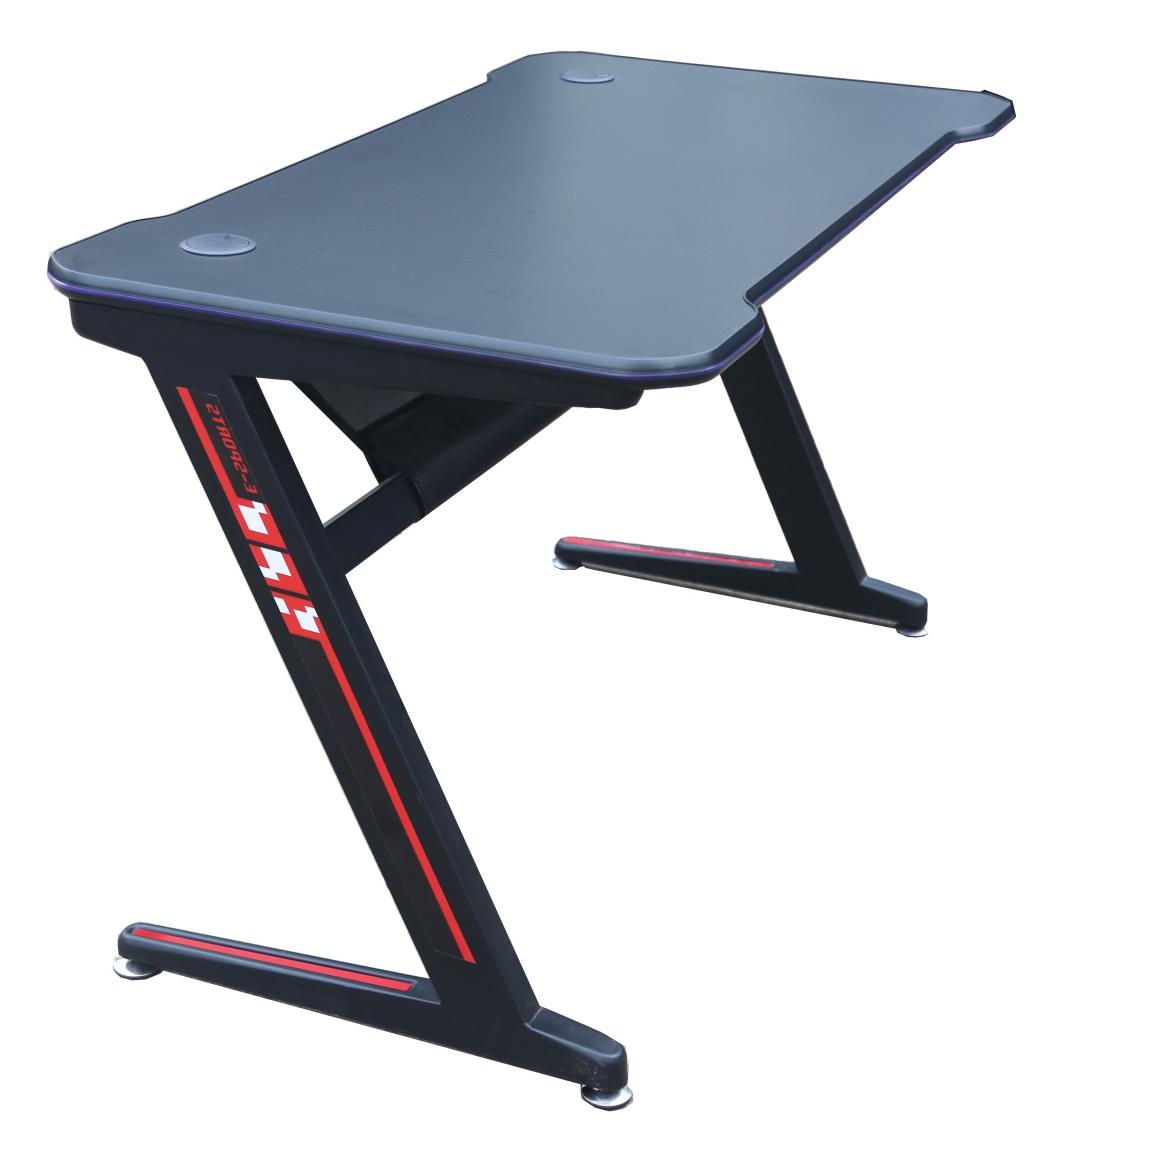 ViscoLogic Gaming Desk Computer Table Z- Shape Sports Racing Table with LED Lights